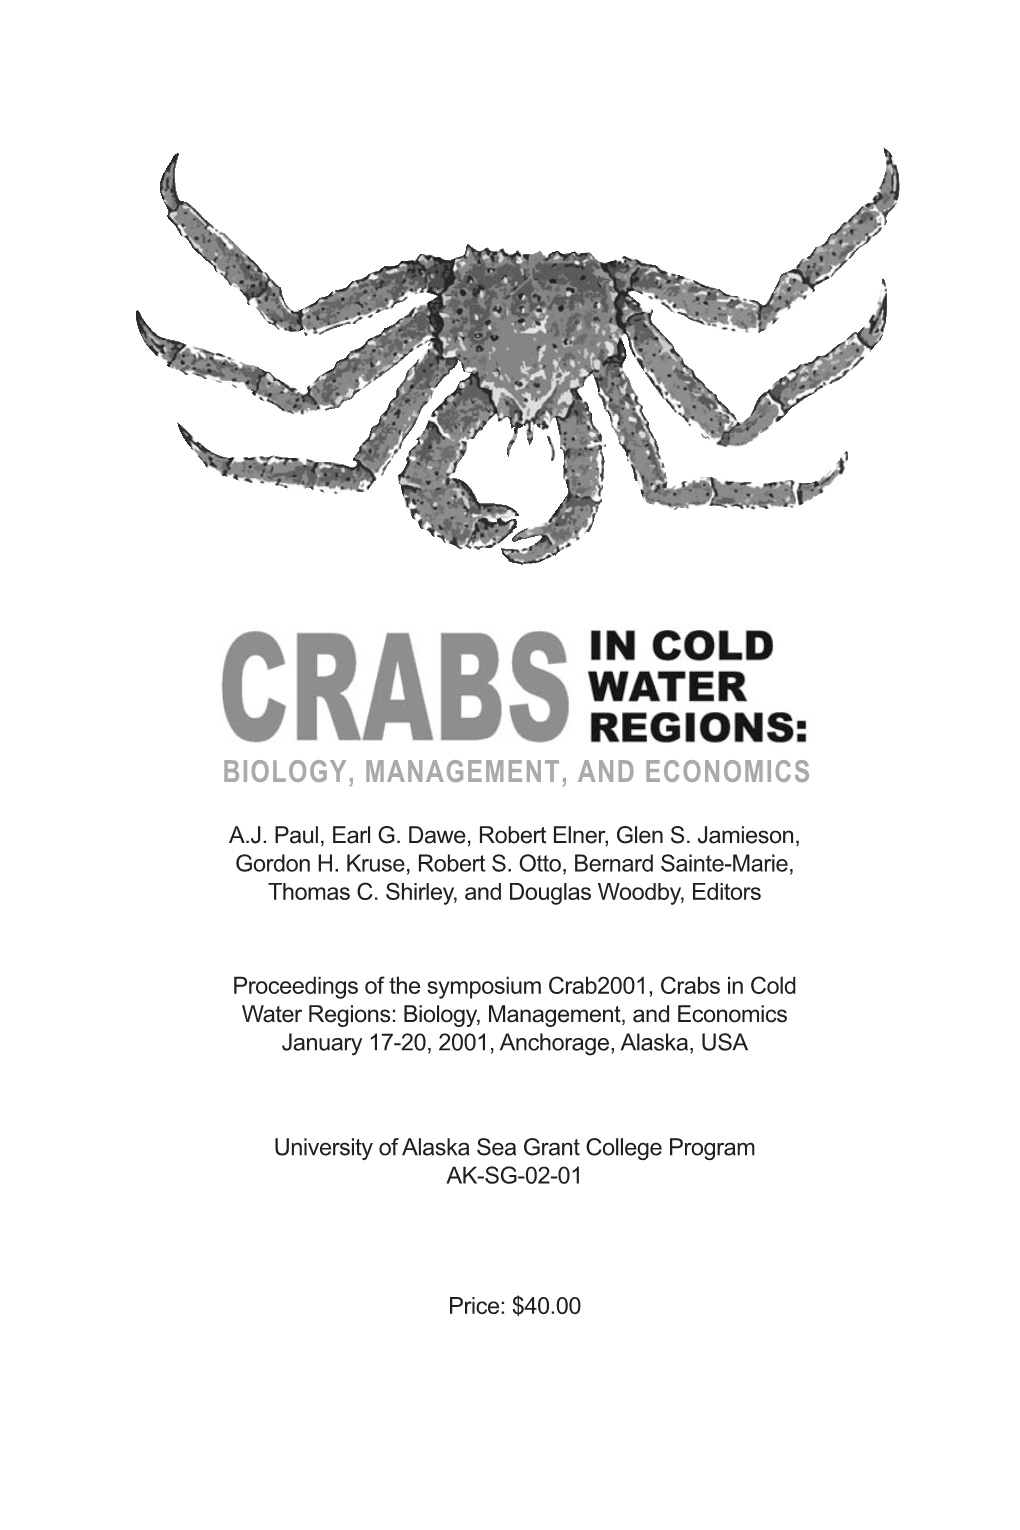 Crabs in Cold Water Regions: Biology, Management, and Economics January 17-20, 2001, Anchorage, Alaska, USA